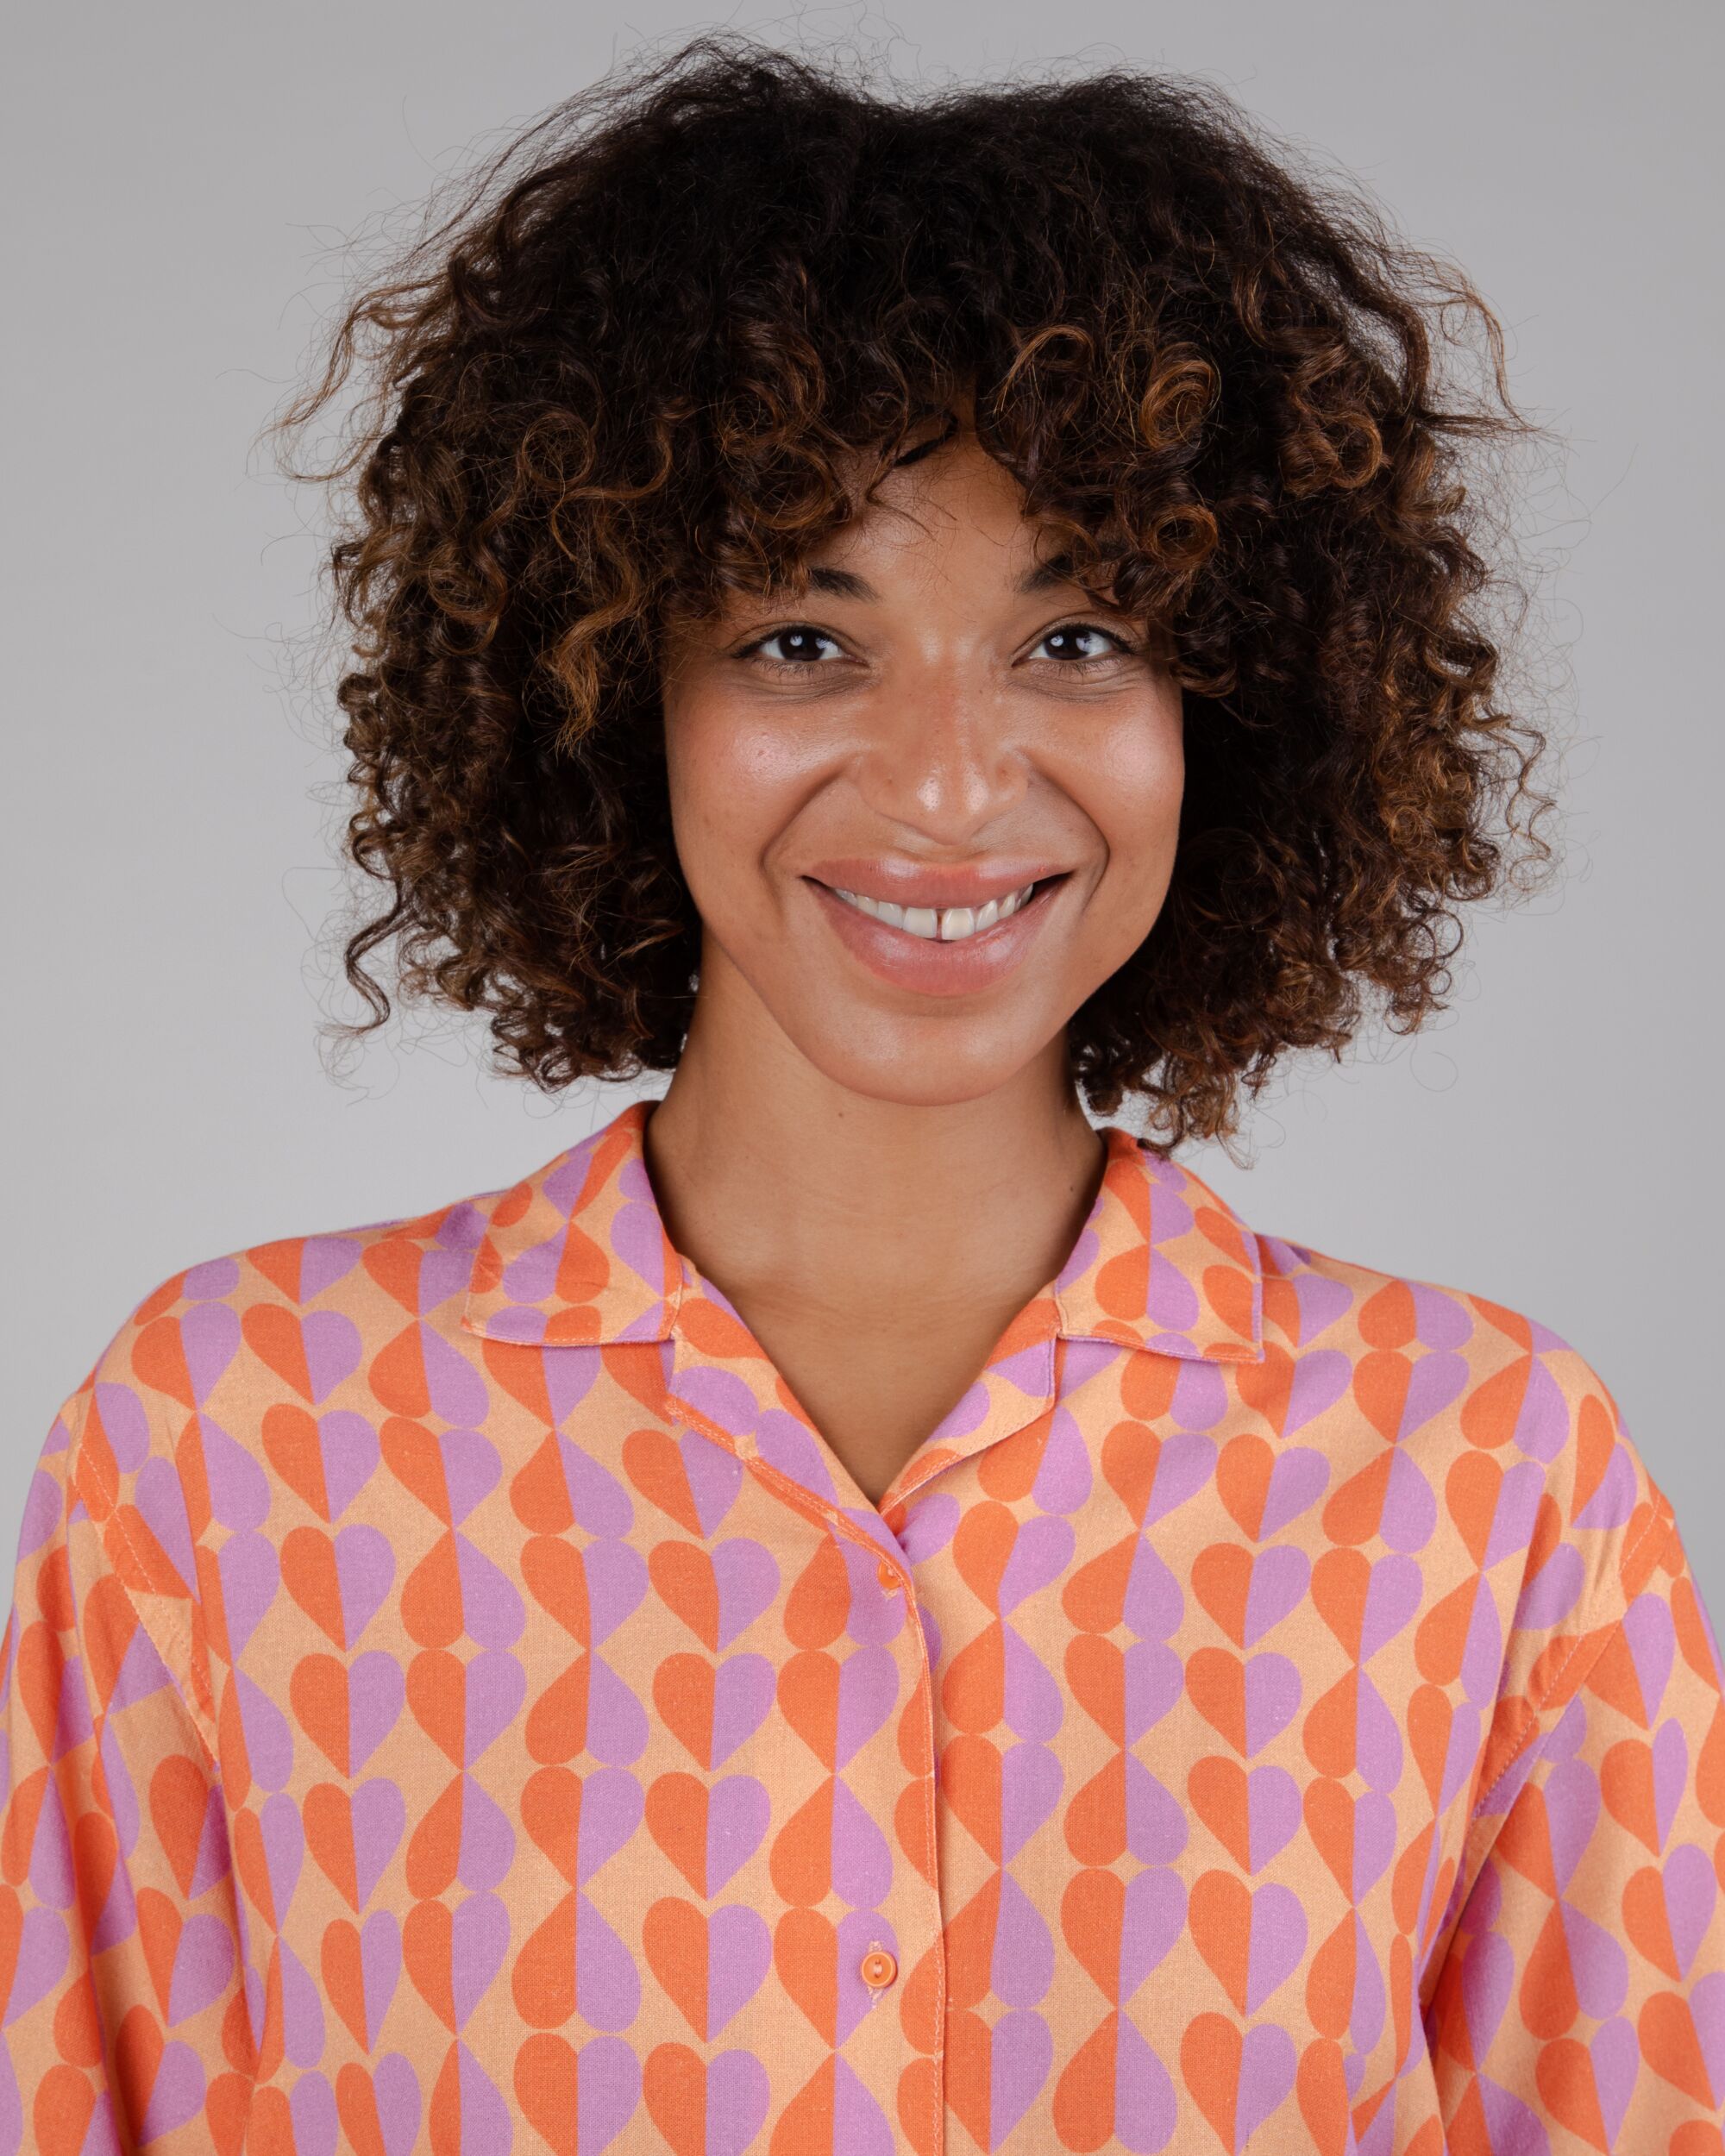 Gummie Aloha blouse in coral made of linen and viscose from Brava Fabrics